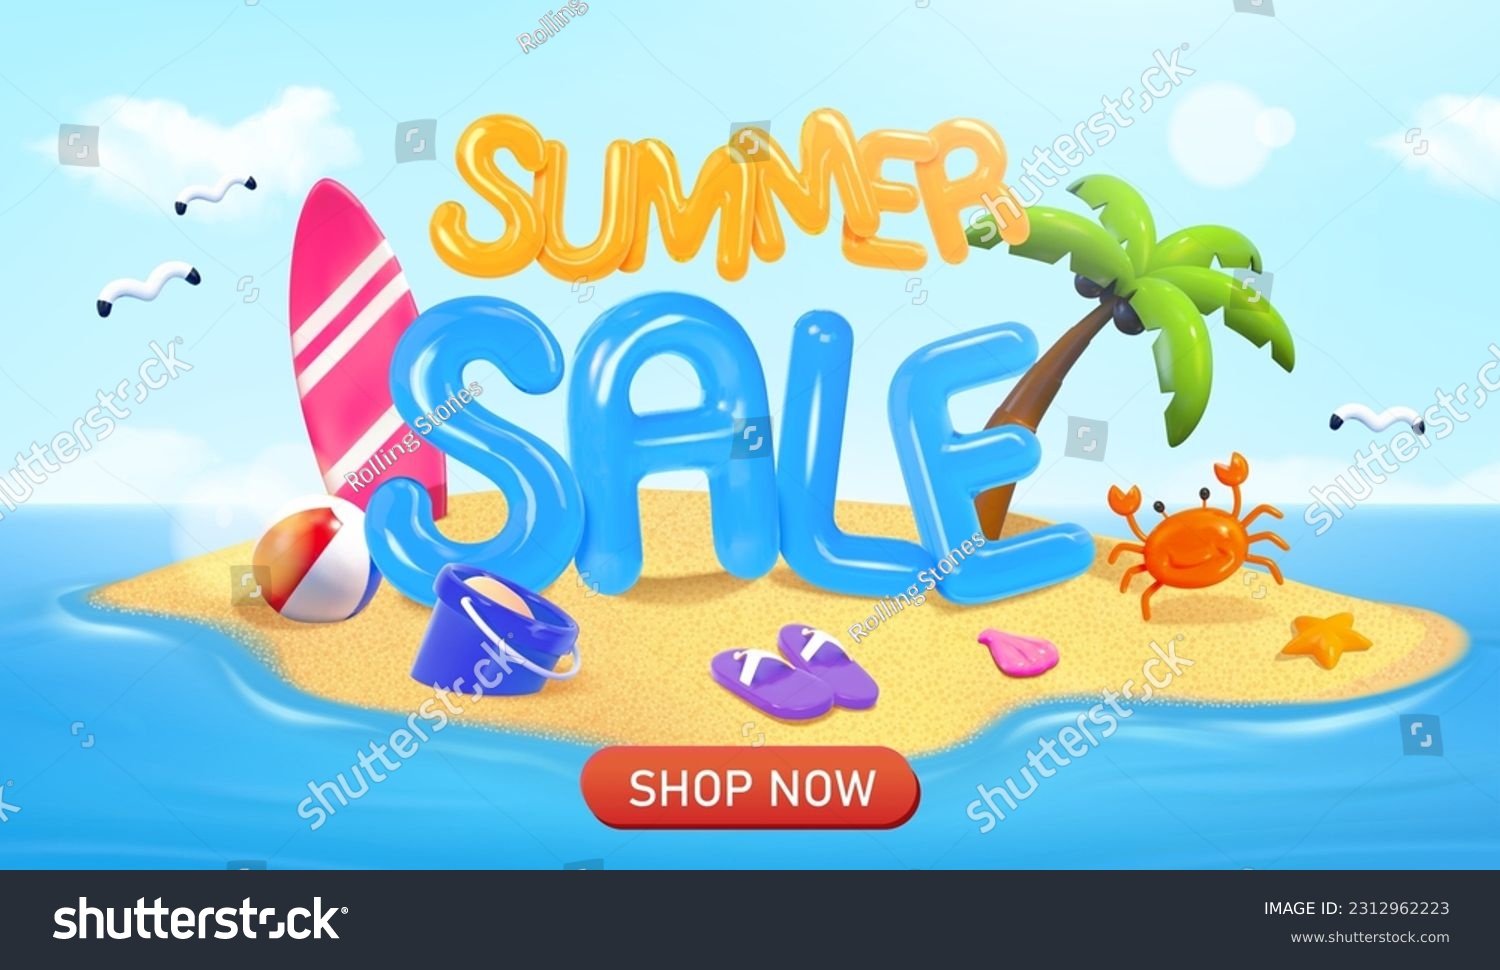 SVG of Summer sale balloon text on beach island with palm tree, sea creatures, surfboard, beach ball, sandals and bucket. Shop now button below. Suitable for online promotion ad. svg